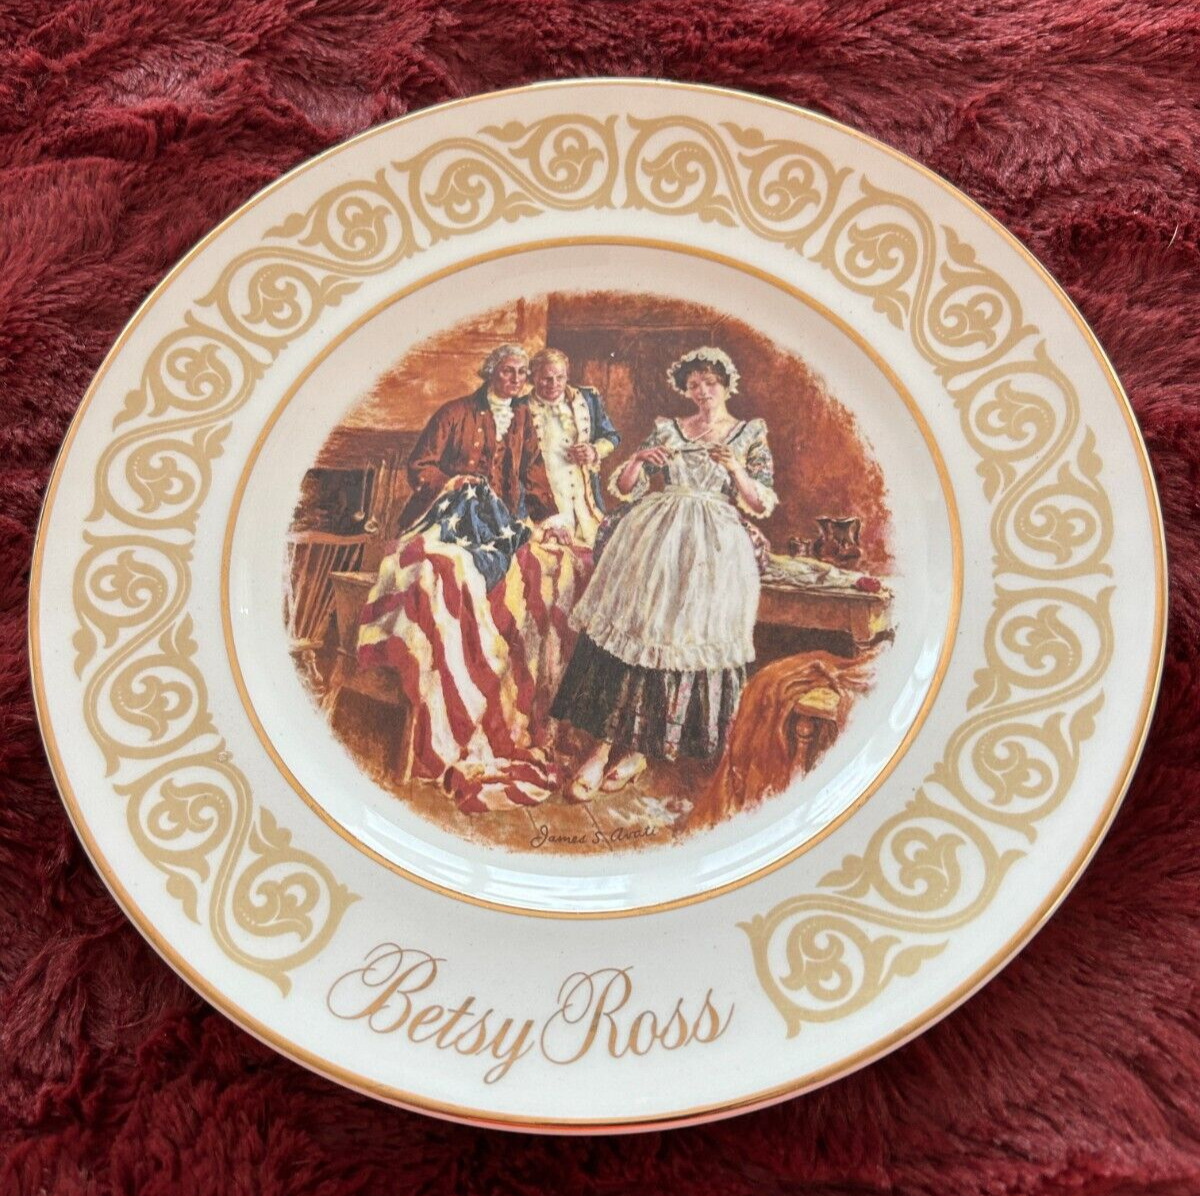 NEW-Avon Betsy Ross Patriot Flagmaker with Founding Members of Congress 9\